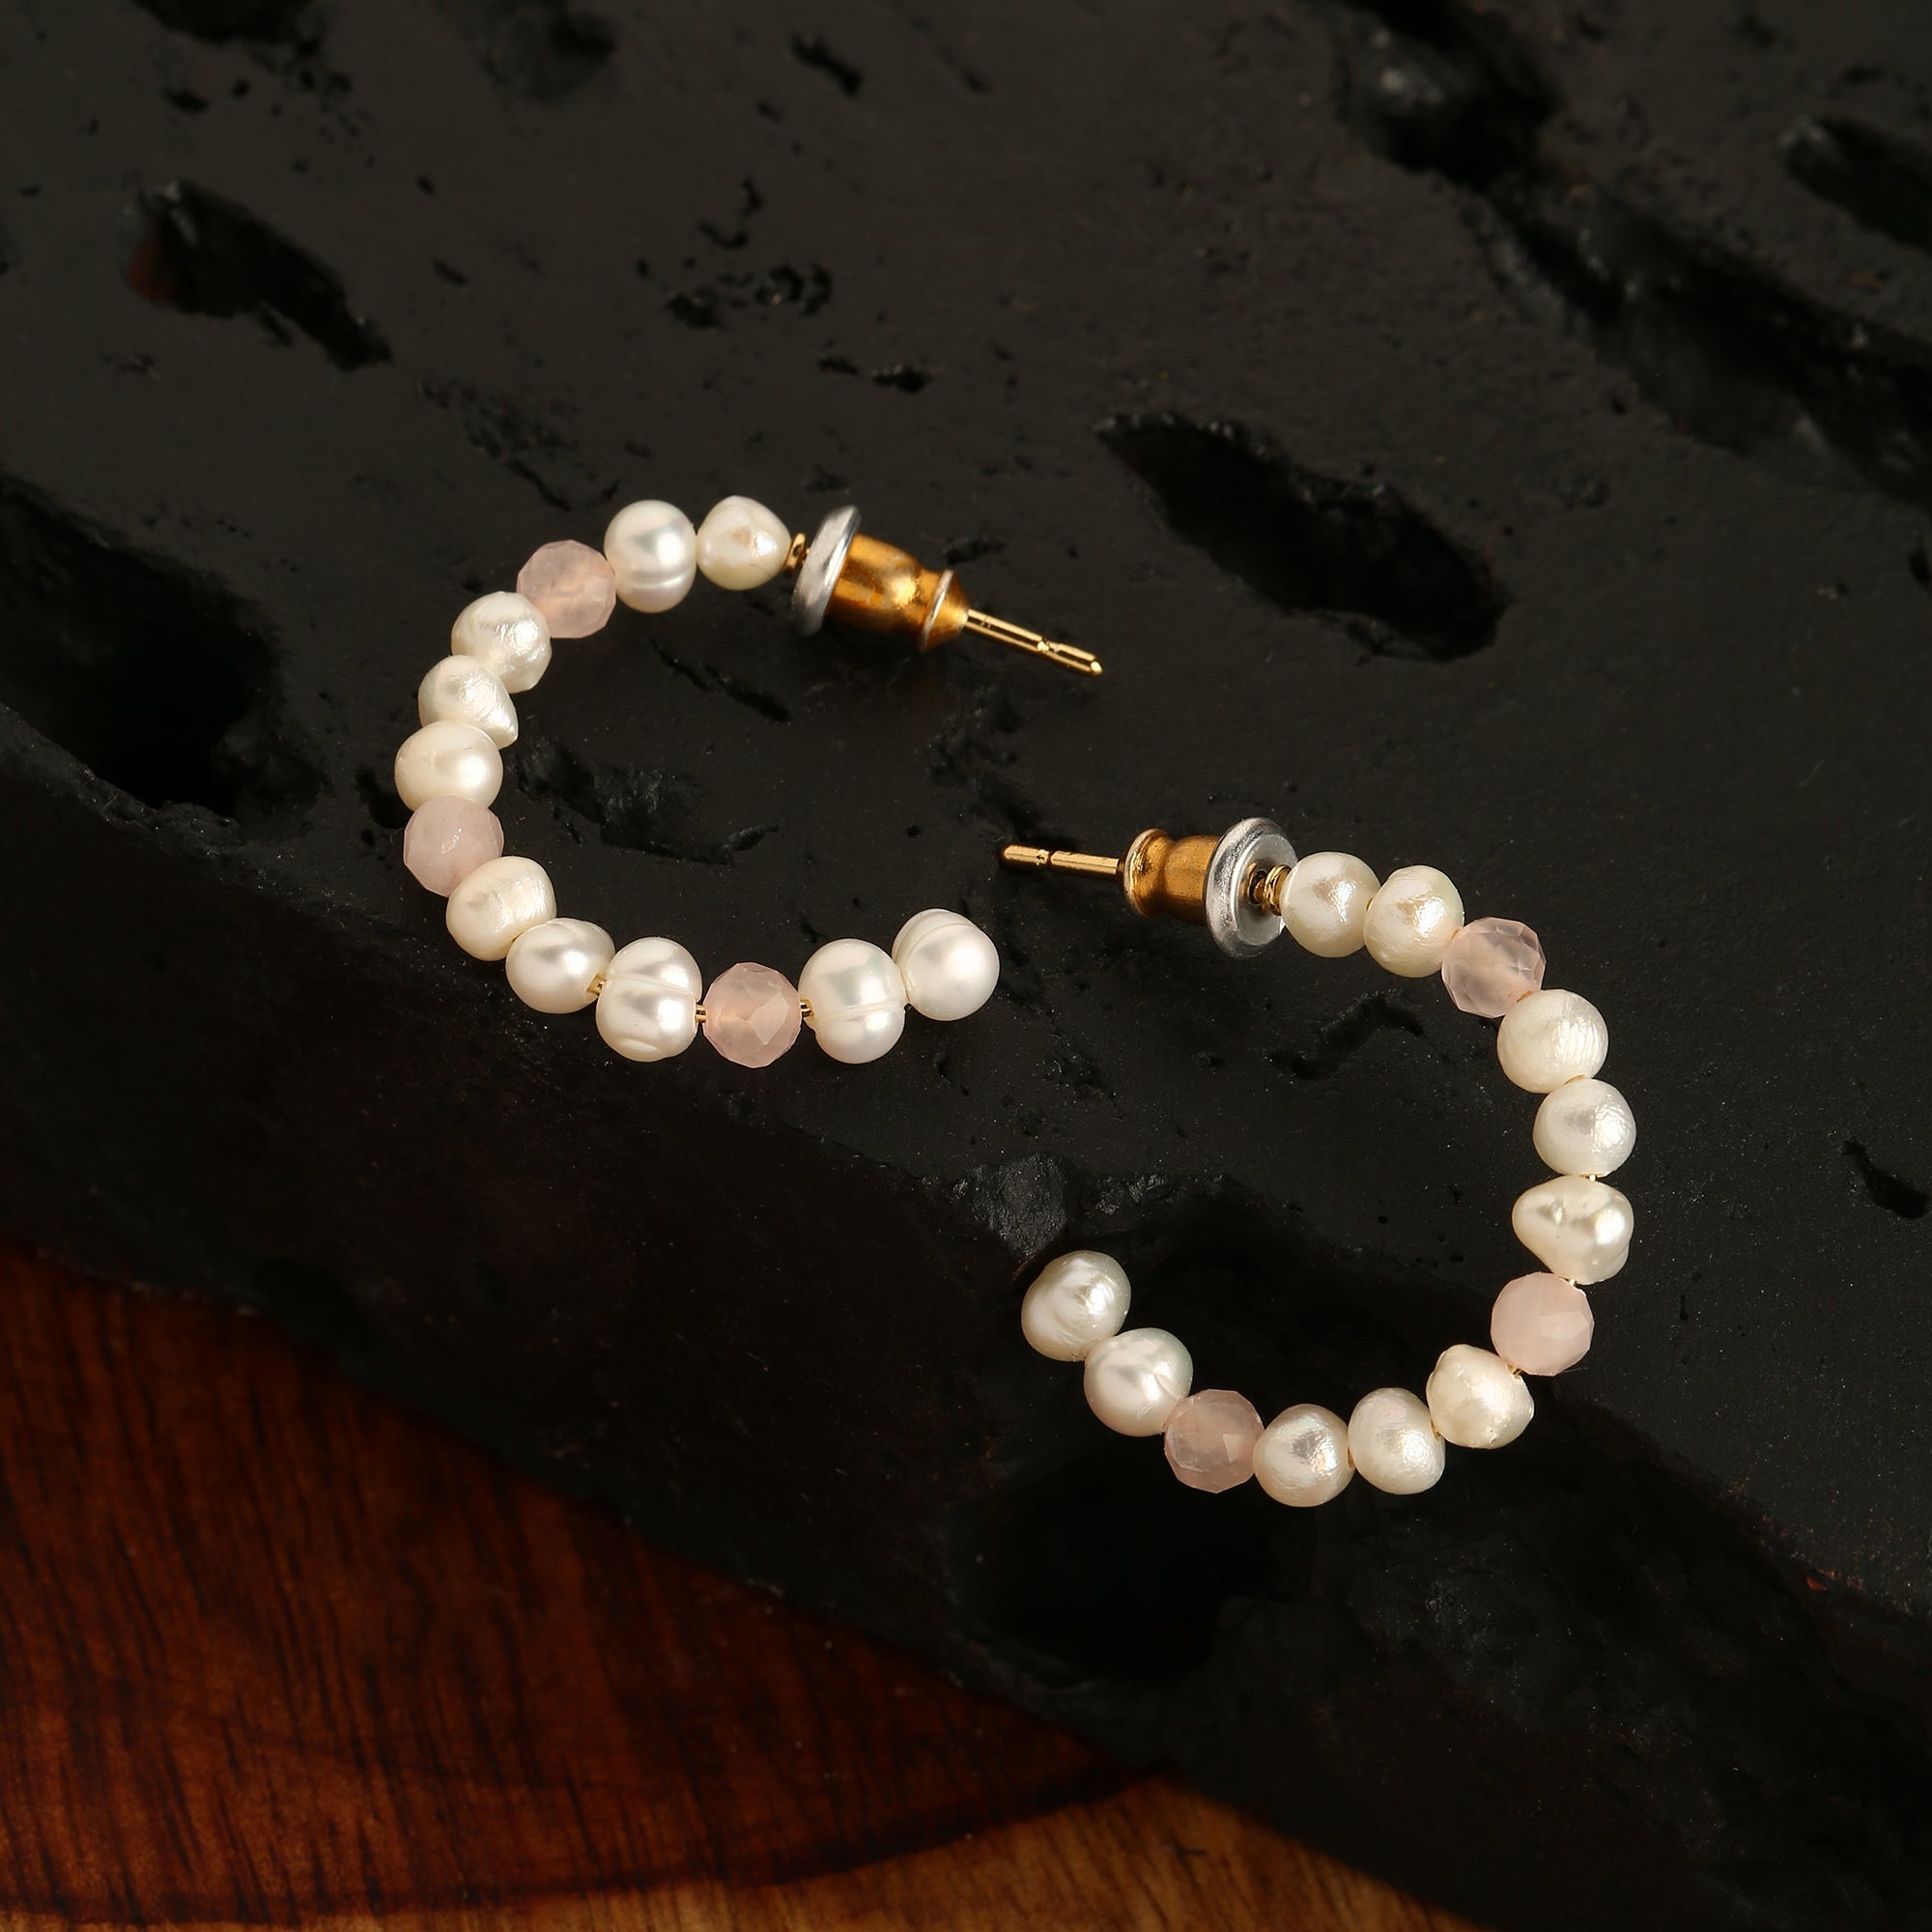 Real Gold Plated Pearl And Rose Quartz Hoop Earrings For Women By Accessorize London